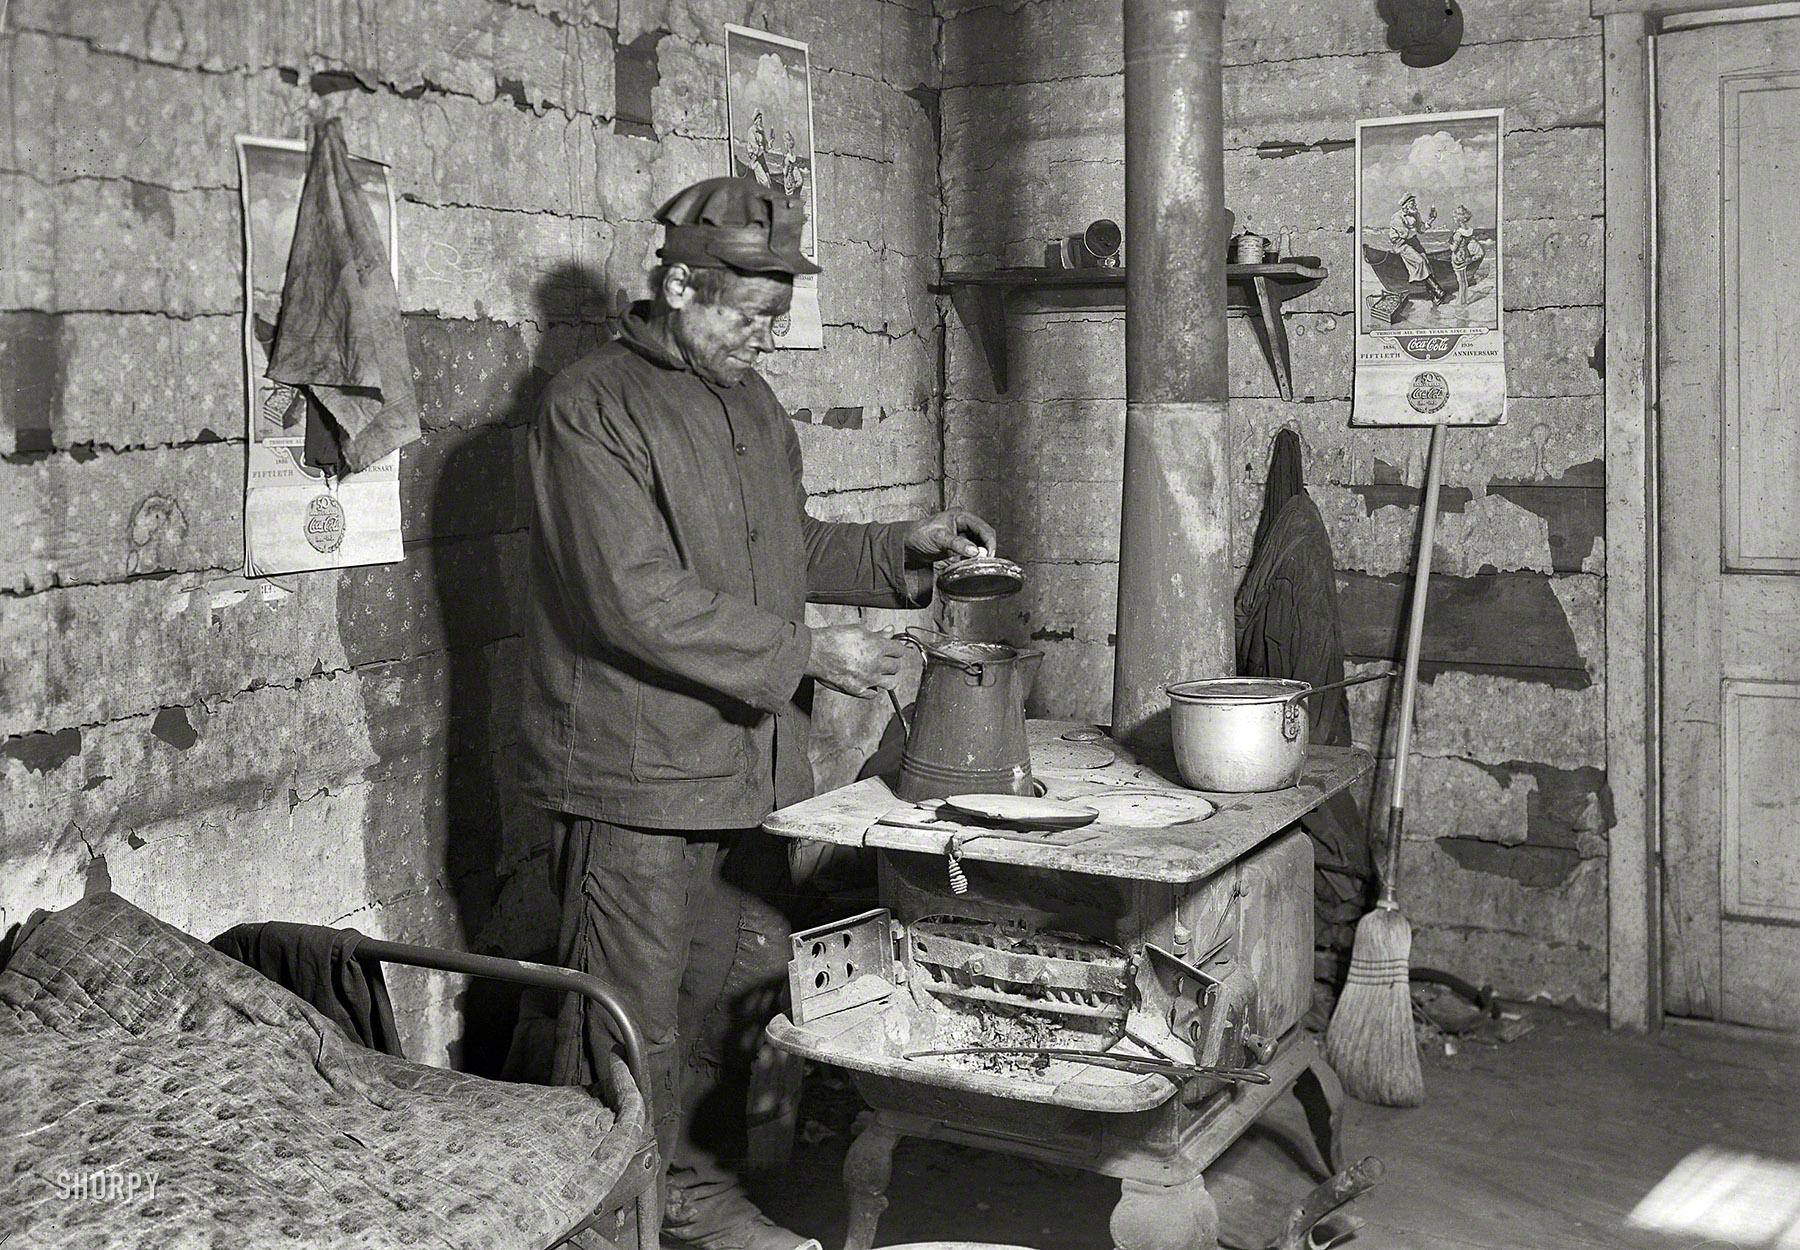 March 1937. Scotts Run, West Virginia. "Employed bachelor coal miner at home in Sessa Hill. This scene is typical of hundreds of bachelors who belong to a group of immigrants whose family was separated by immigration restrictions. This man may, or may not, have a wife in another country." Photograph by Lewis Wickes Hine. Decor by Coca-Cola. Large format acetate negative. View full size.